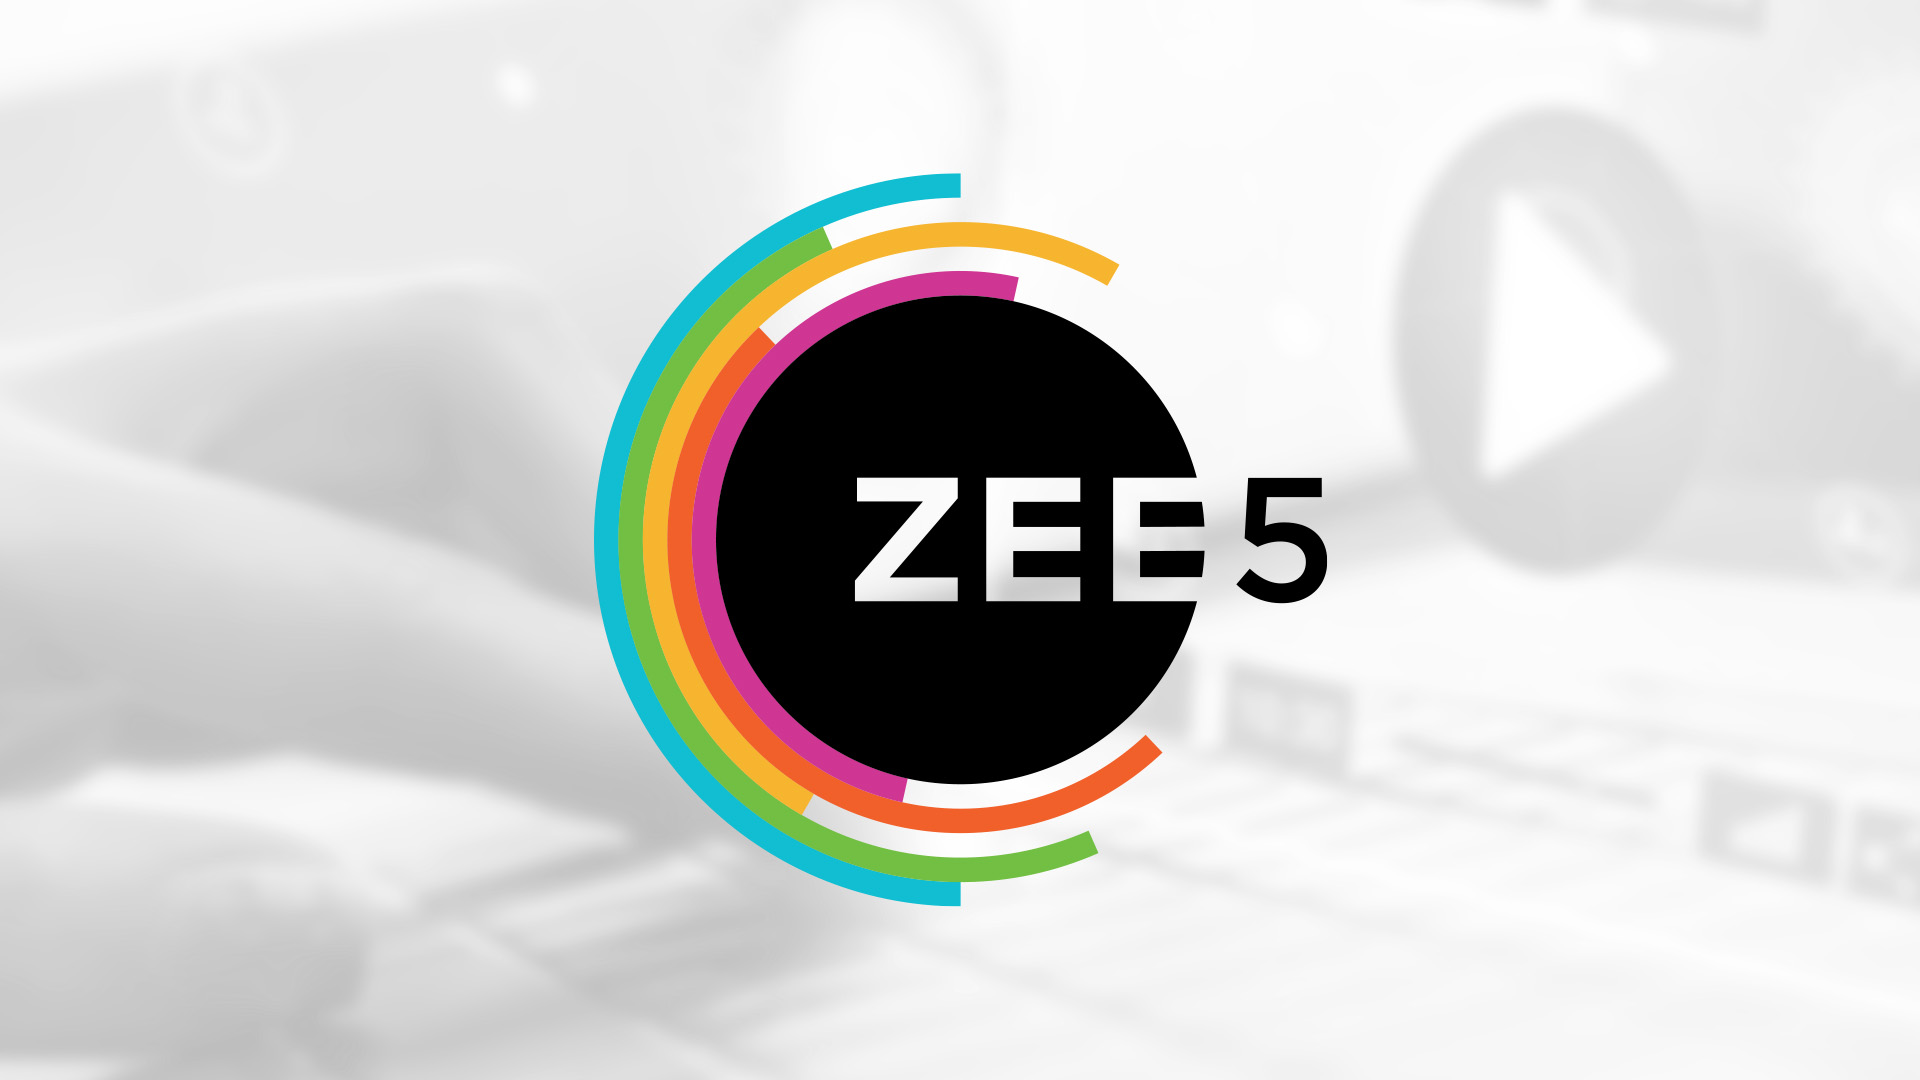 How using “Best Time to Send” lifted ZEE5 global’s campaign CTRs by 60%